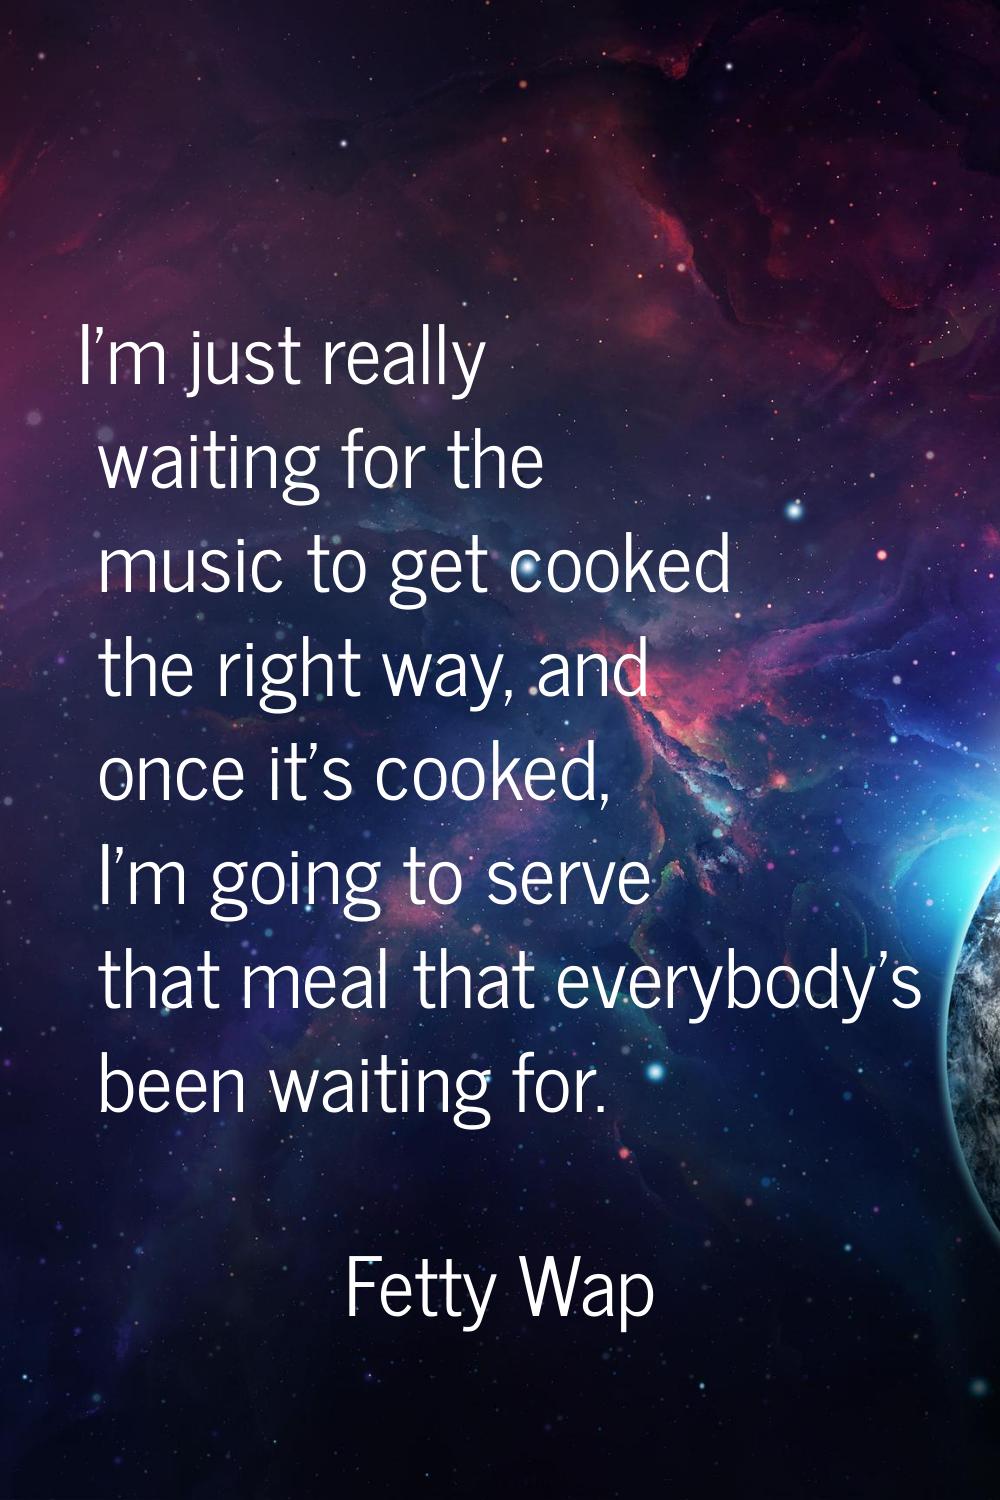 I'm just really waiting for the music to get cooked the right way, and once it's cooked, I'm going 